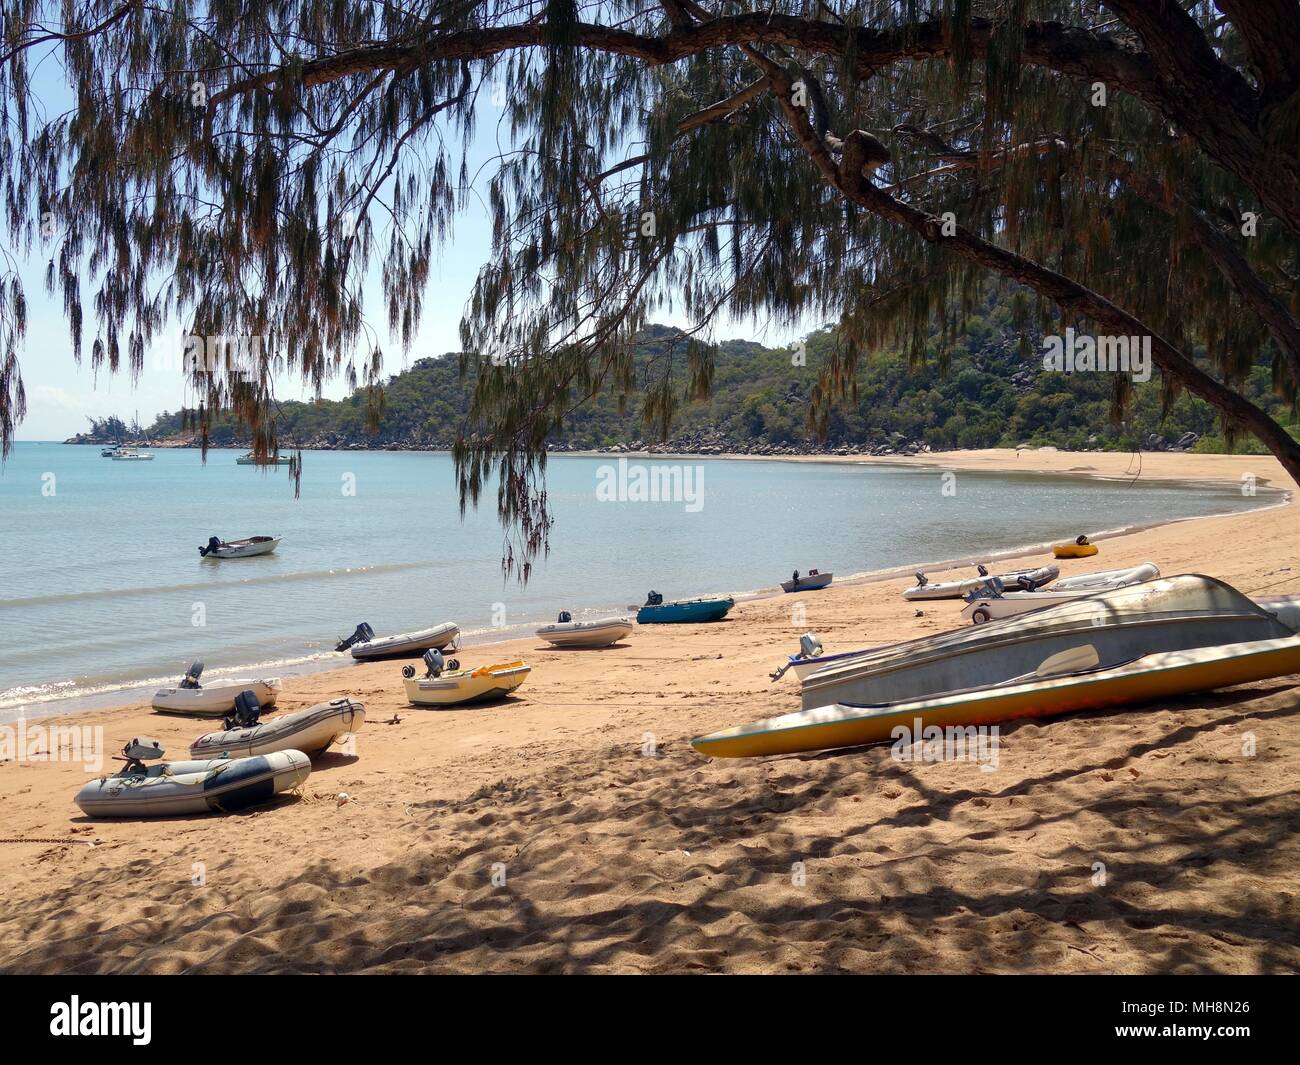 Magnetic Island, Queensland, Australia: August 31, 2017: Boats resting on a pretty sandy beach looking through trees on an island Stock Photo